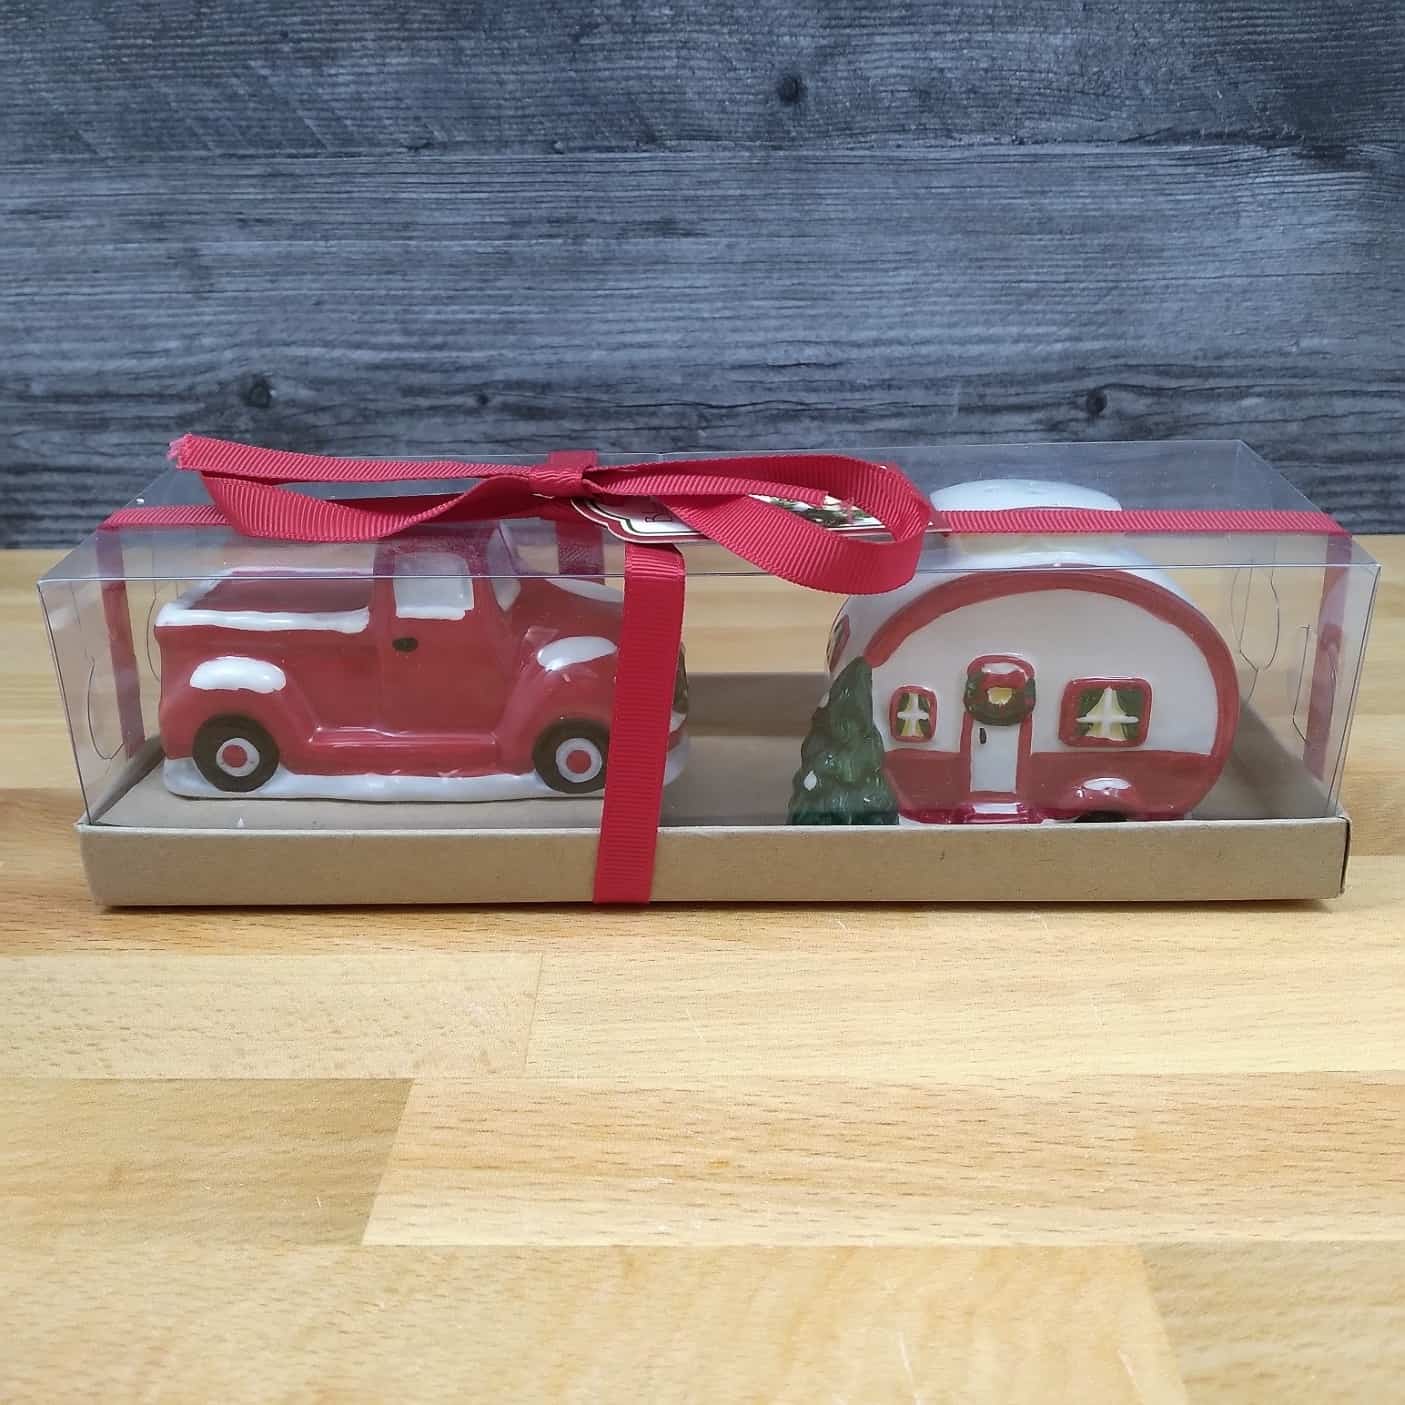 This Retro Camper Holiday Design Salt Pepper Set Collectible by Blue Sky Clayworks is made with love by Premier Homegoods! Shop more unique gift ideas today with Spots Initiatives, the best way to support creators.